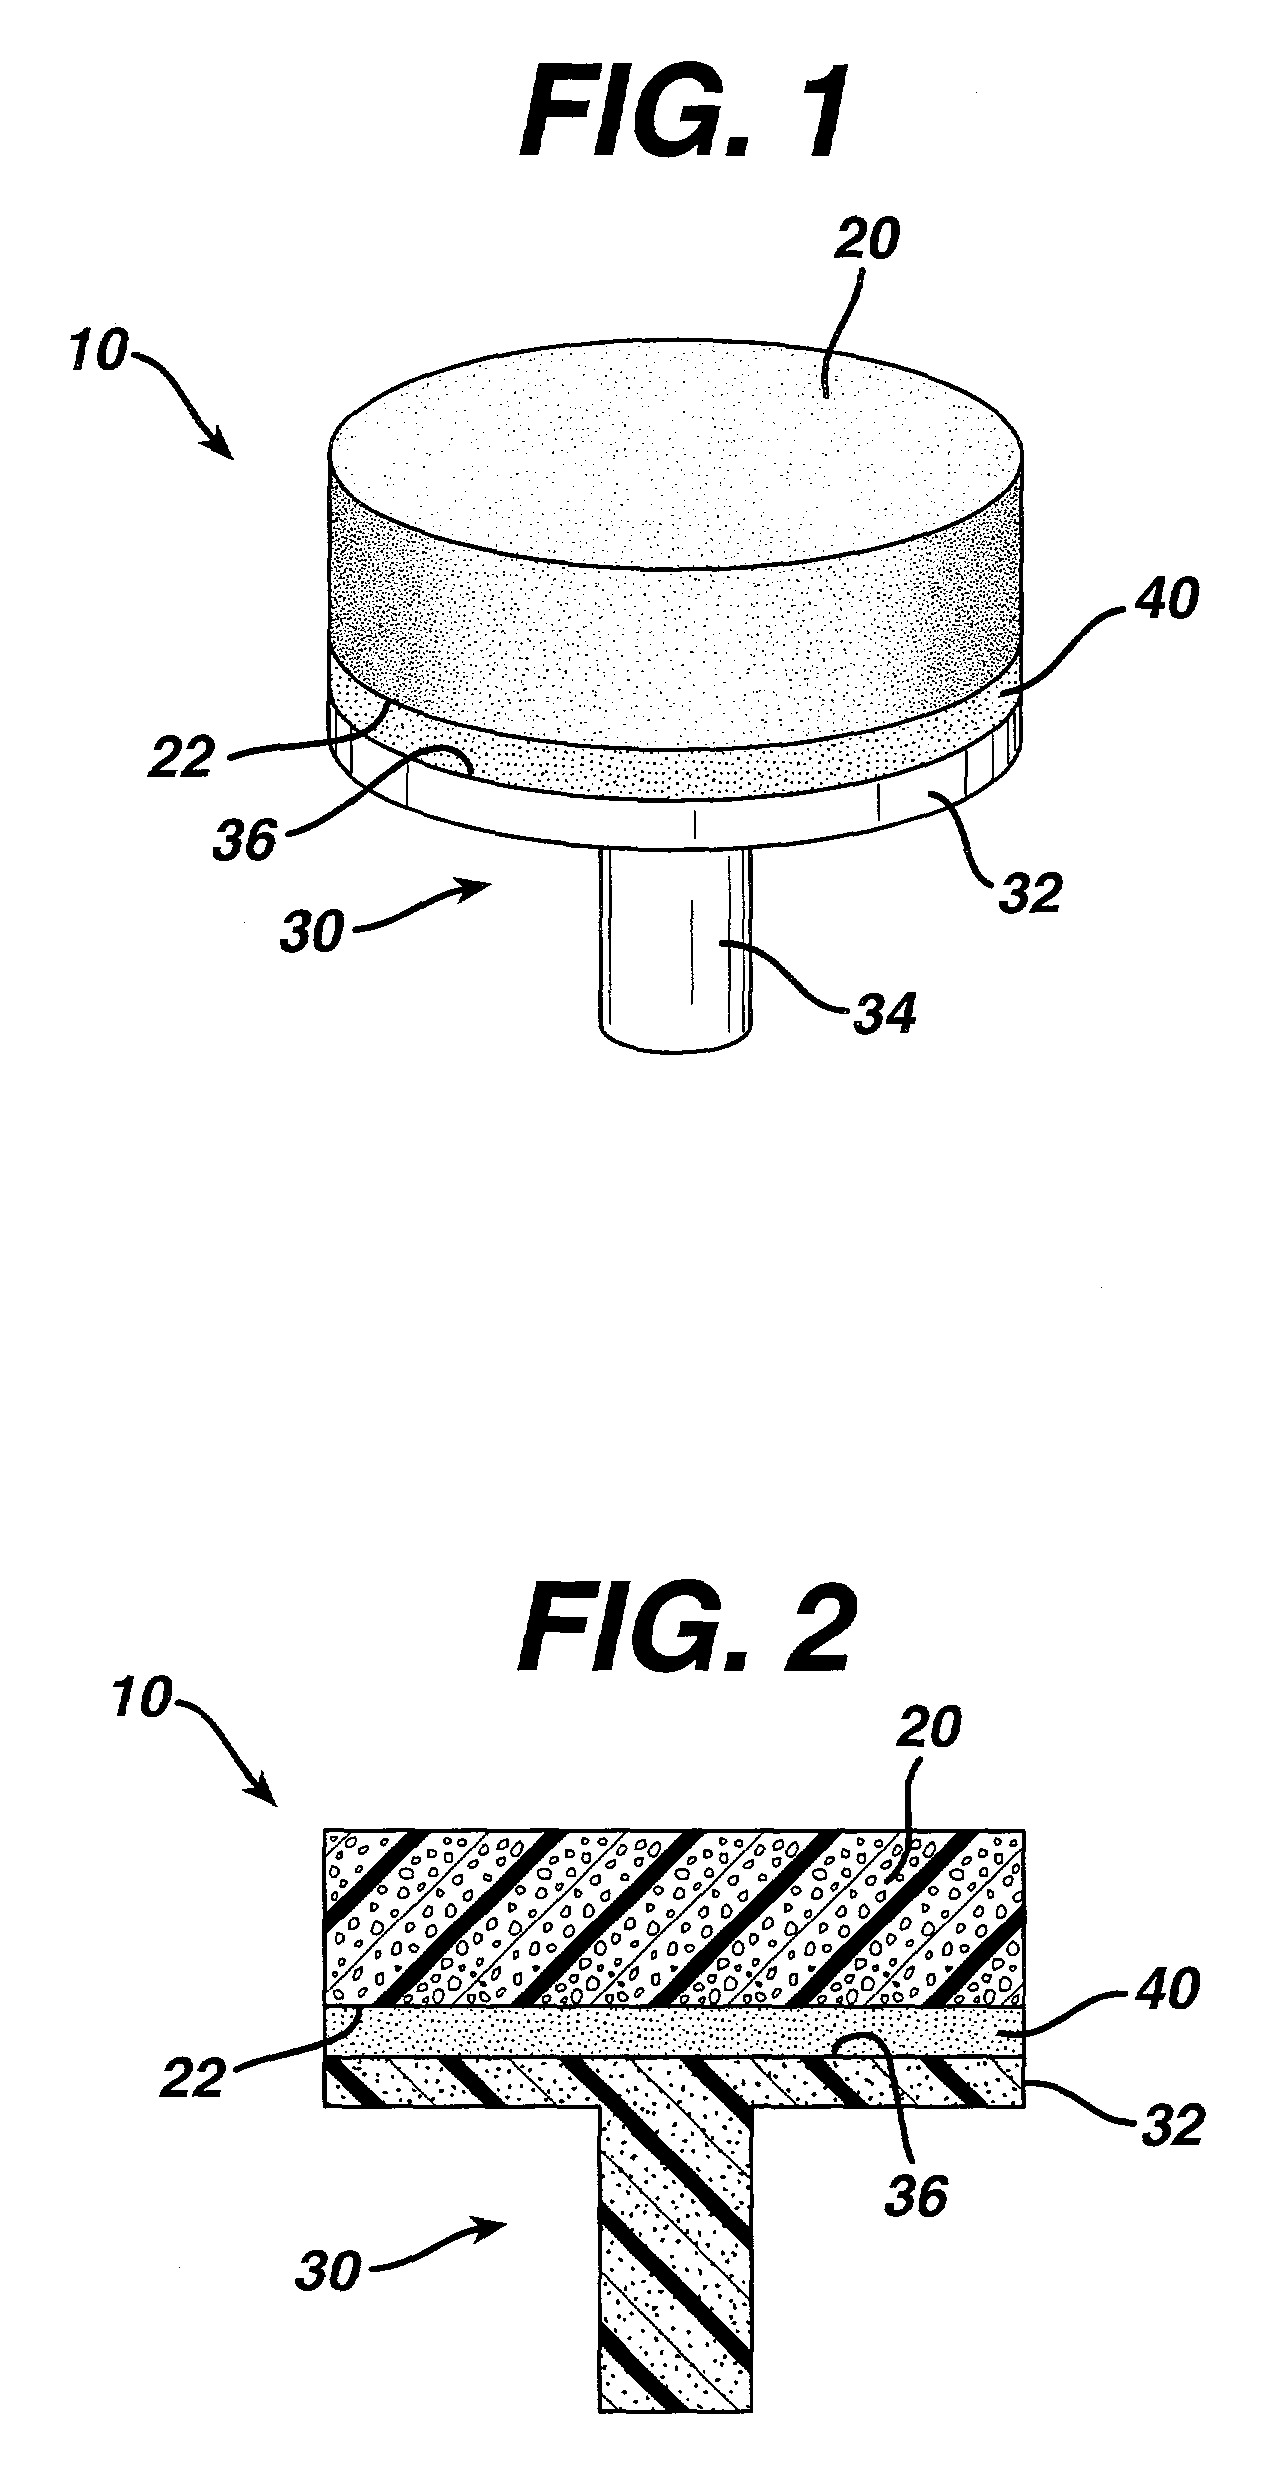 Attachment of absorbable tissue scaffolds to fixation devices